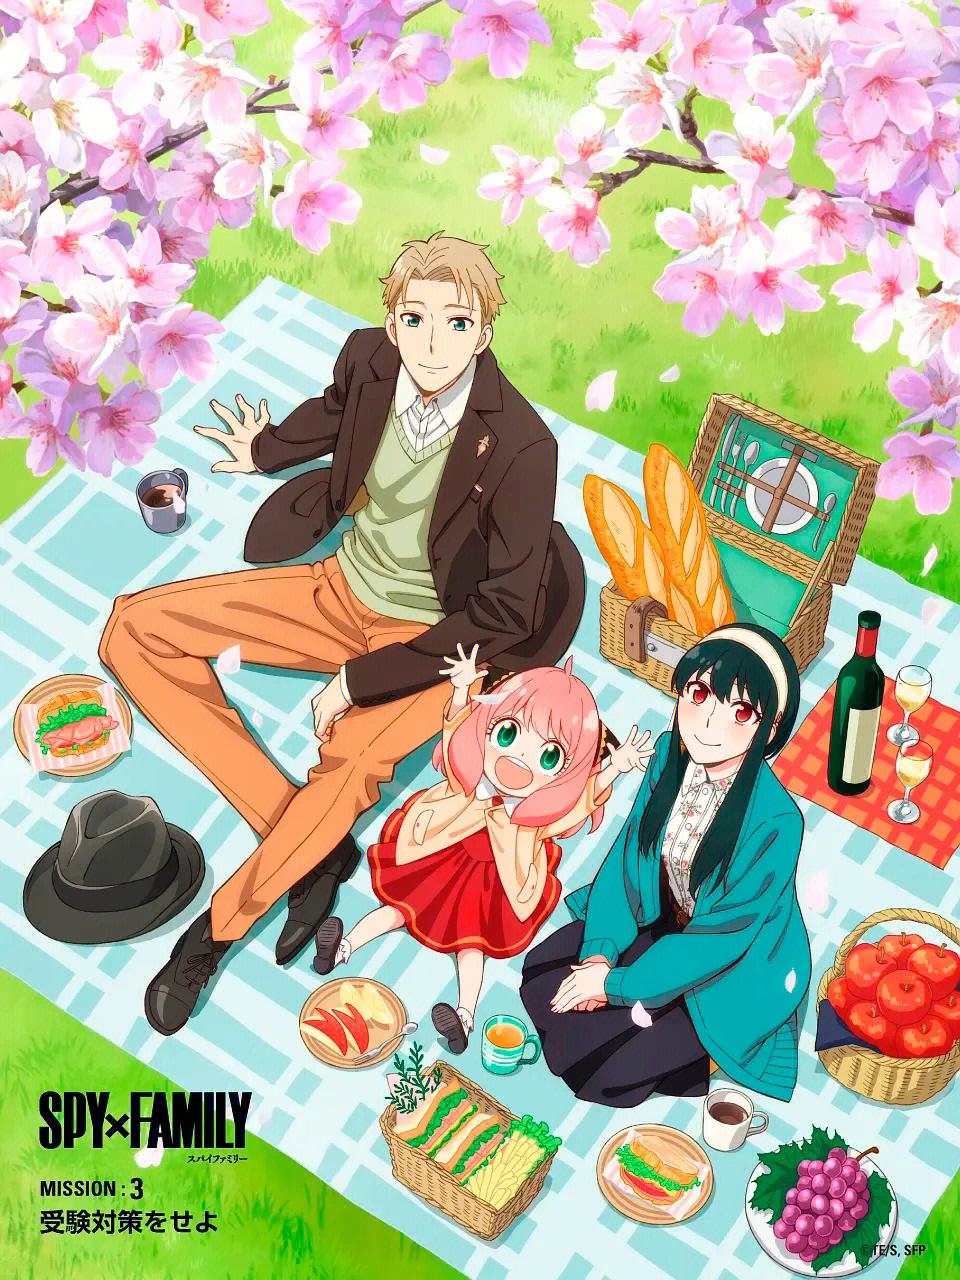 Anime 960x1280 Spy x Family picnic picnic basket food high angle flowers petals smiling portrait display grass Loid Forger Yor Forger Anya Forger fruit sandwiches alcohol anime boys anime girls Japanese